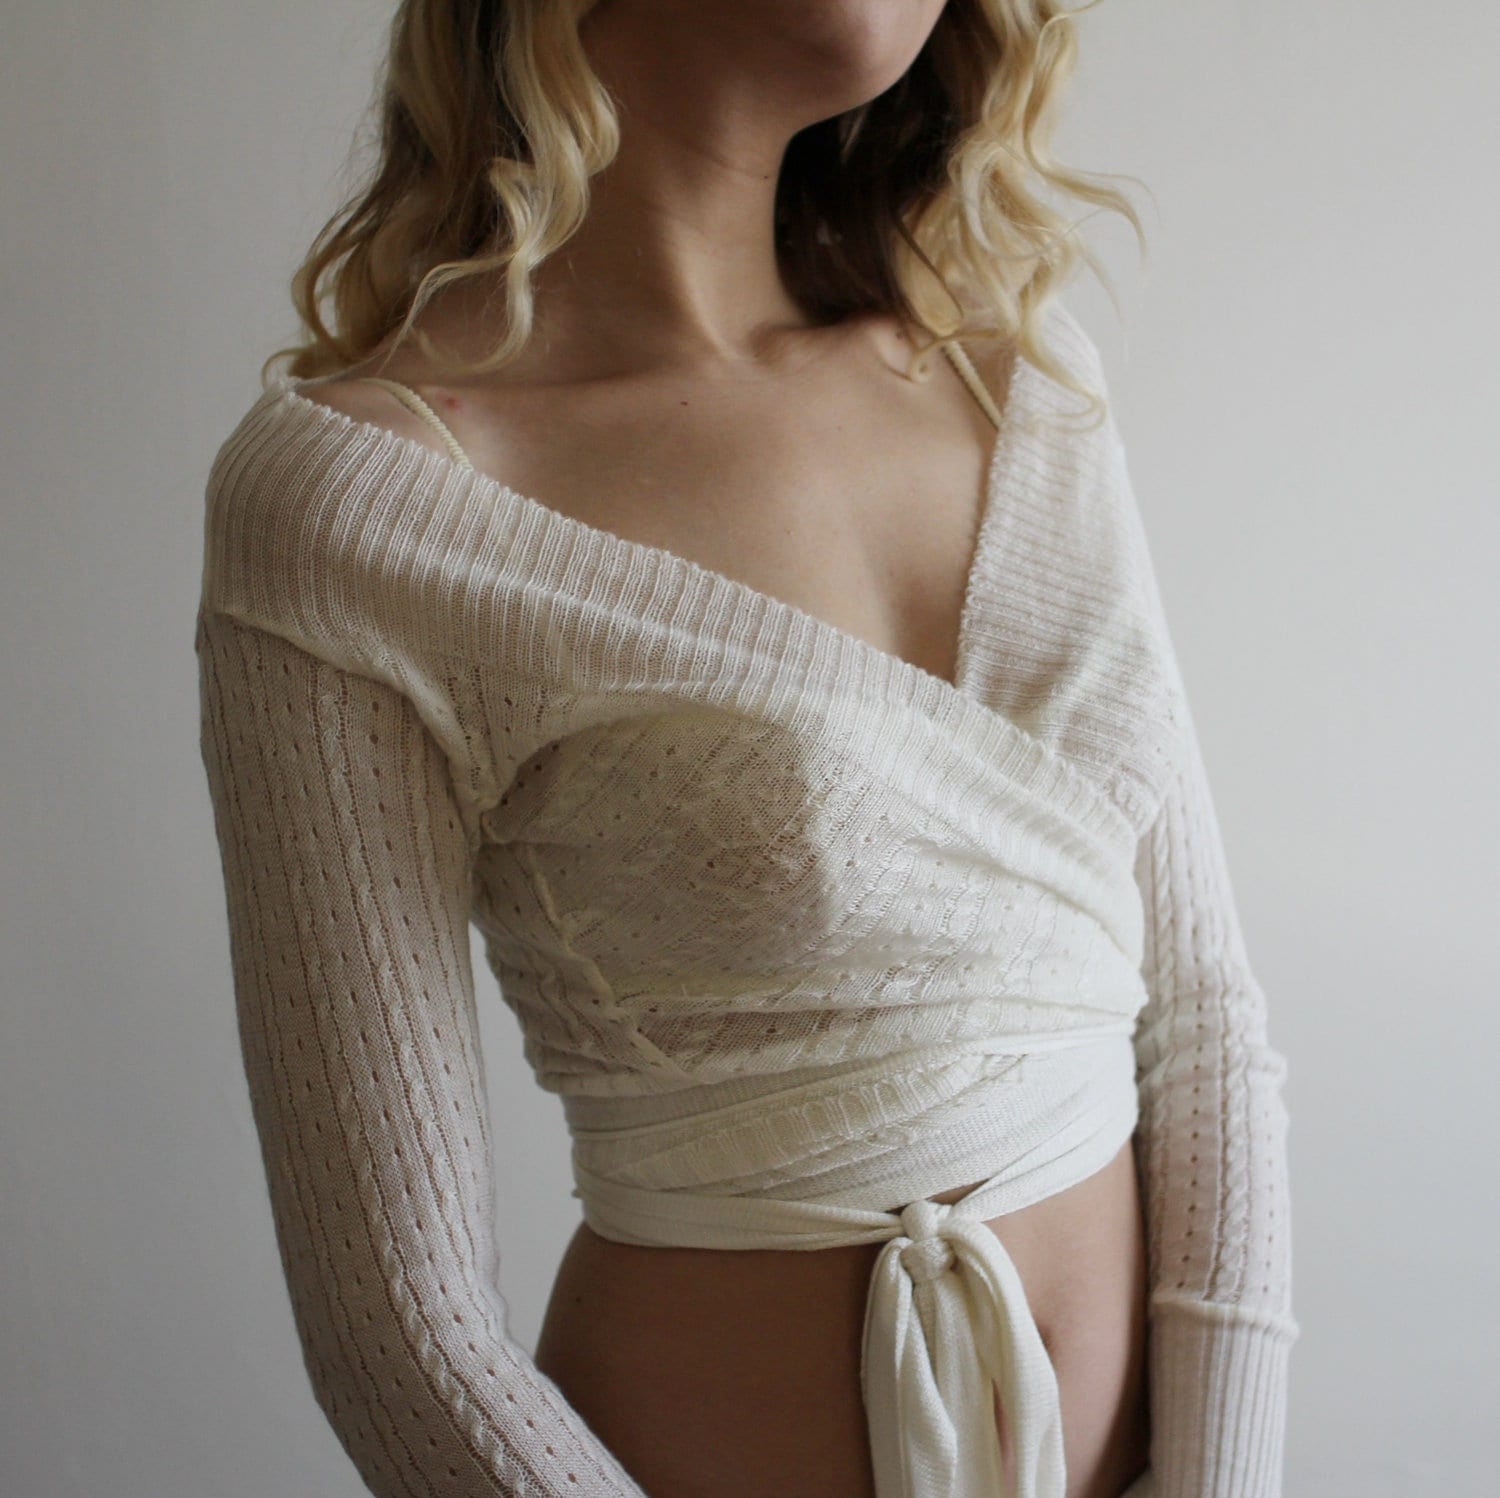 Womens silk and cashmere shrug or wrap cardigan, Bridal Shrug, Ivory Wrap, Silk Sweater, Pointelle Knit, Cashmere Sweater, Made to Order